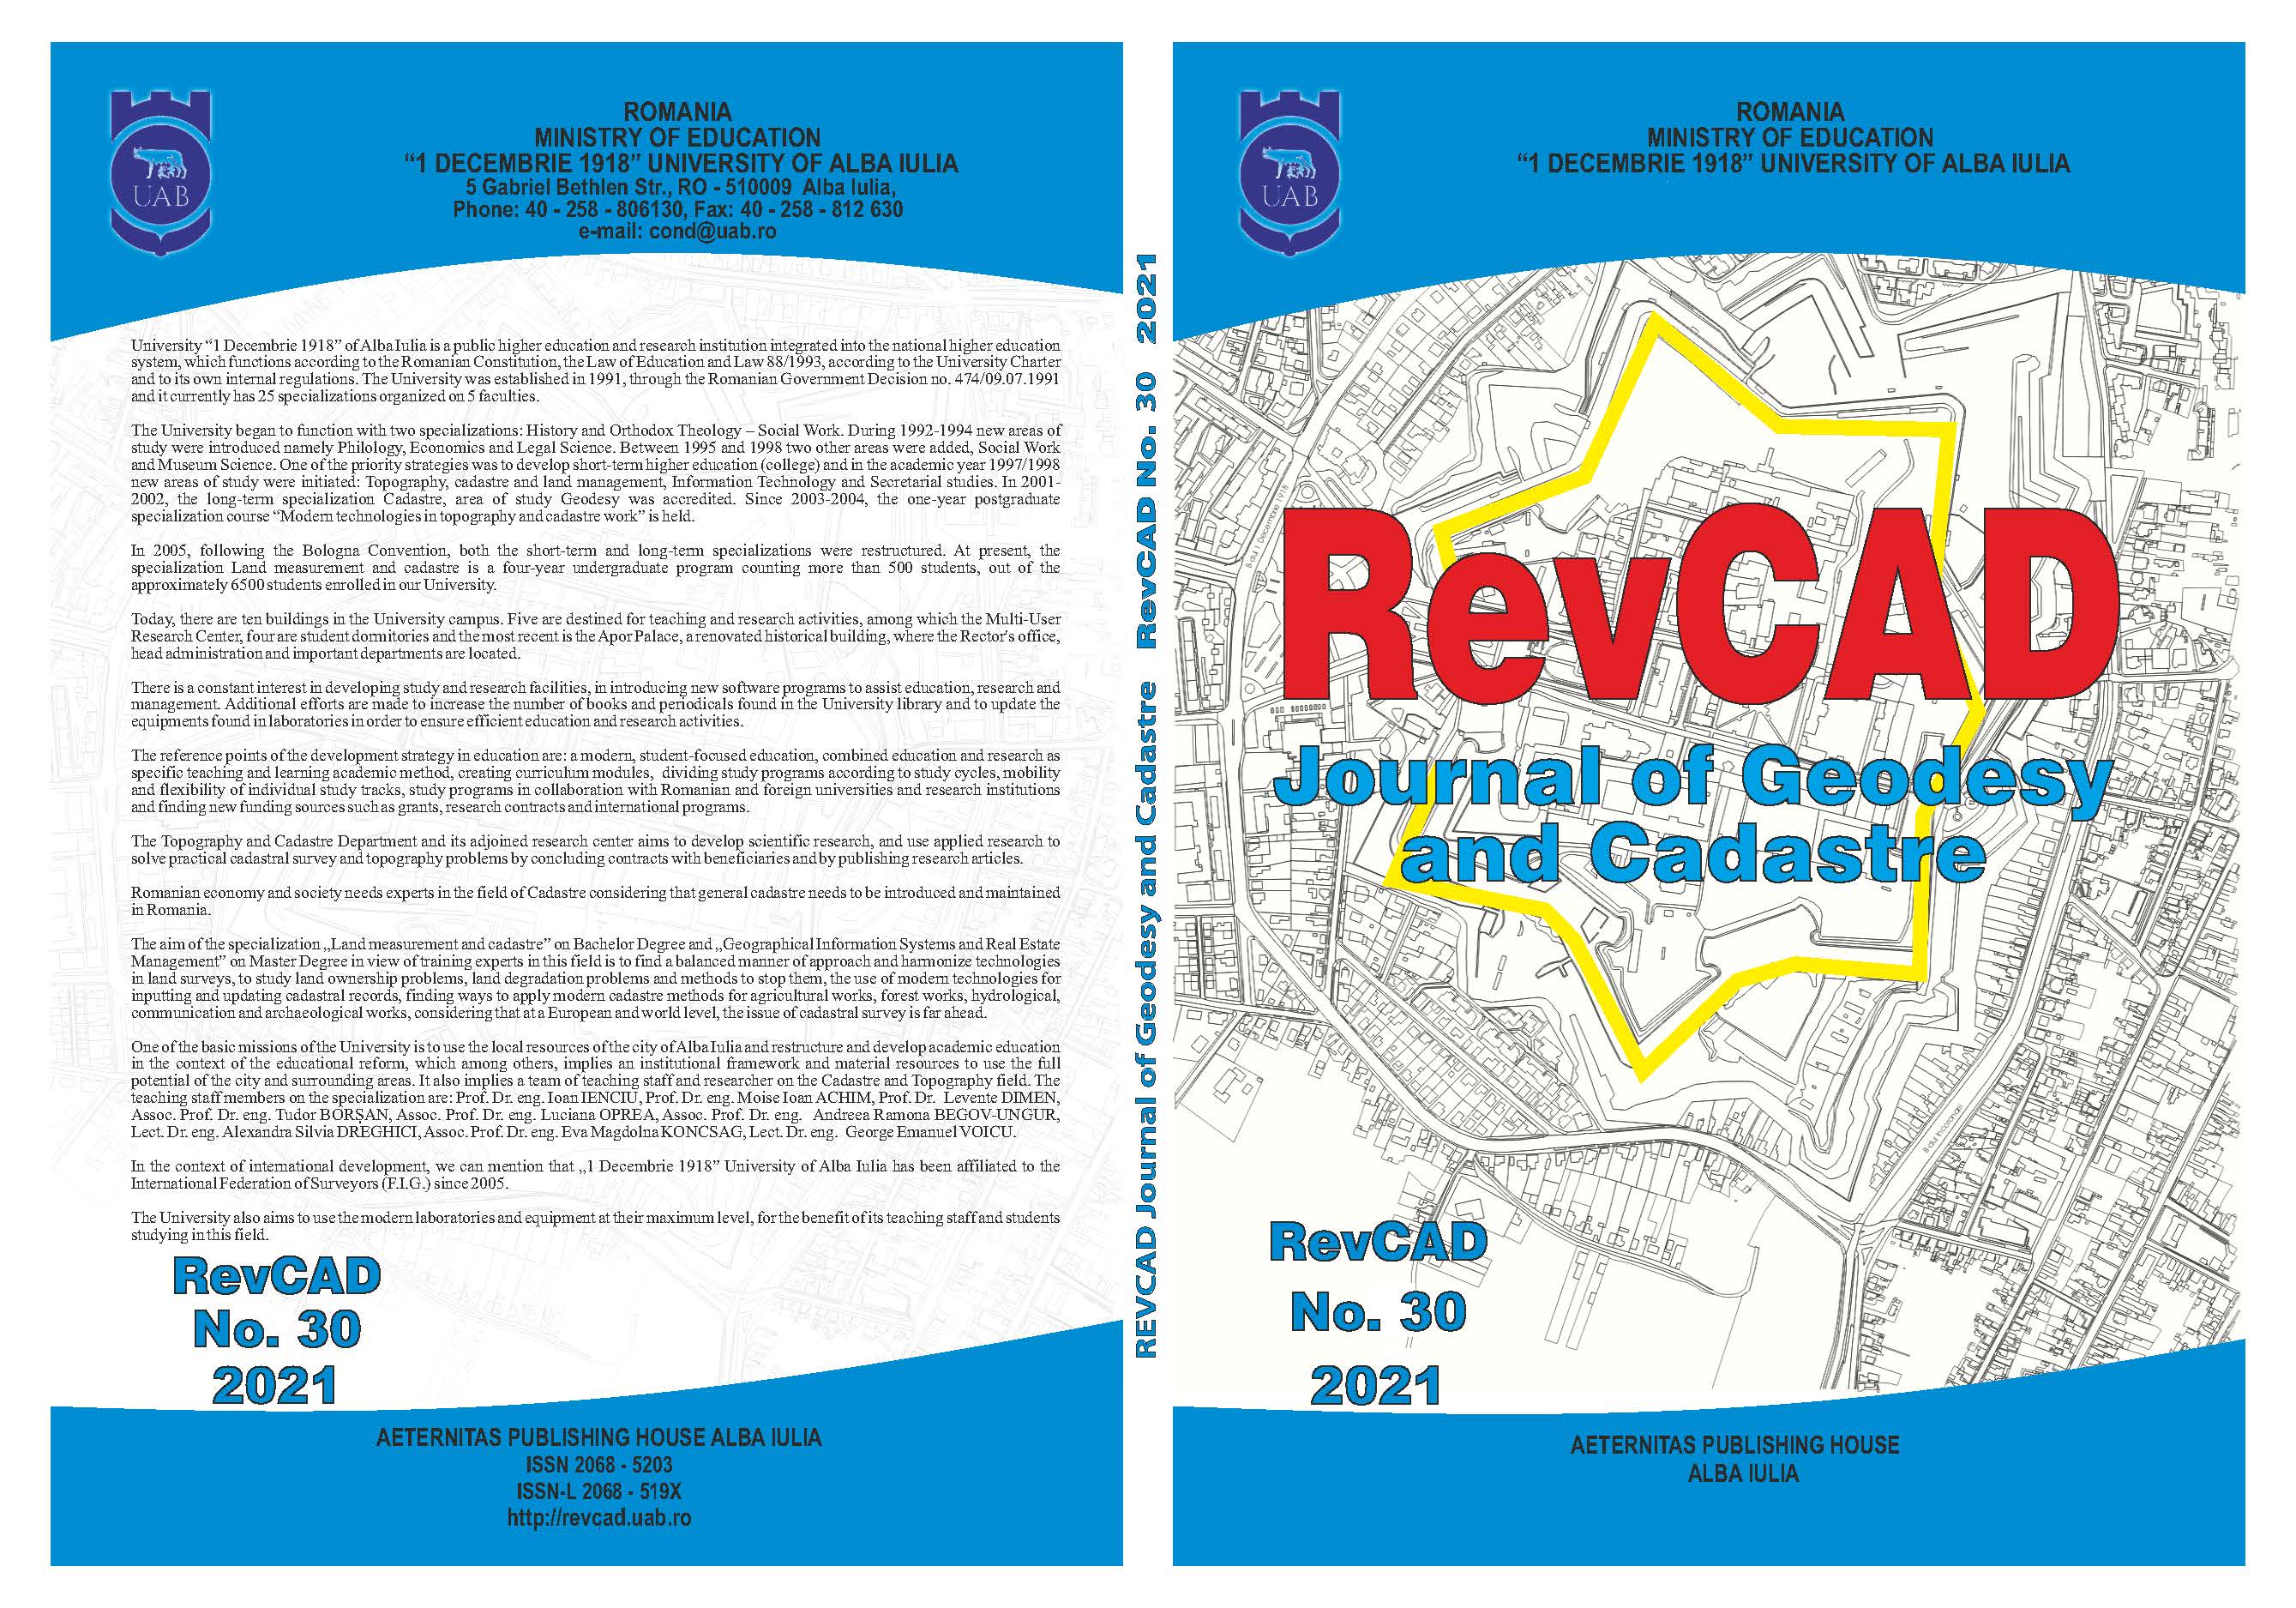 Aspects Regarding the Topo-Cadastral Operations Necessary for The Introduction of the Building Networks and the Modernization of the Street Framework in the Locality of Bălcaciu, Jidvei Commune, Alba County